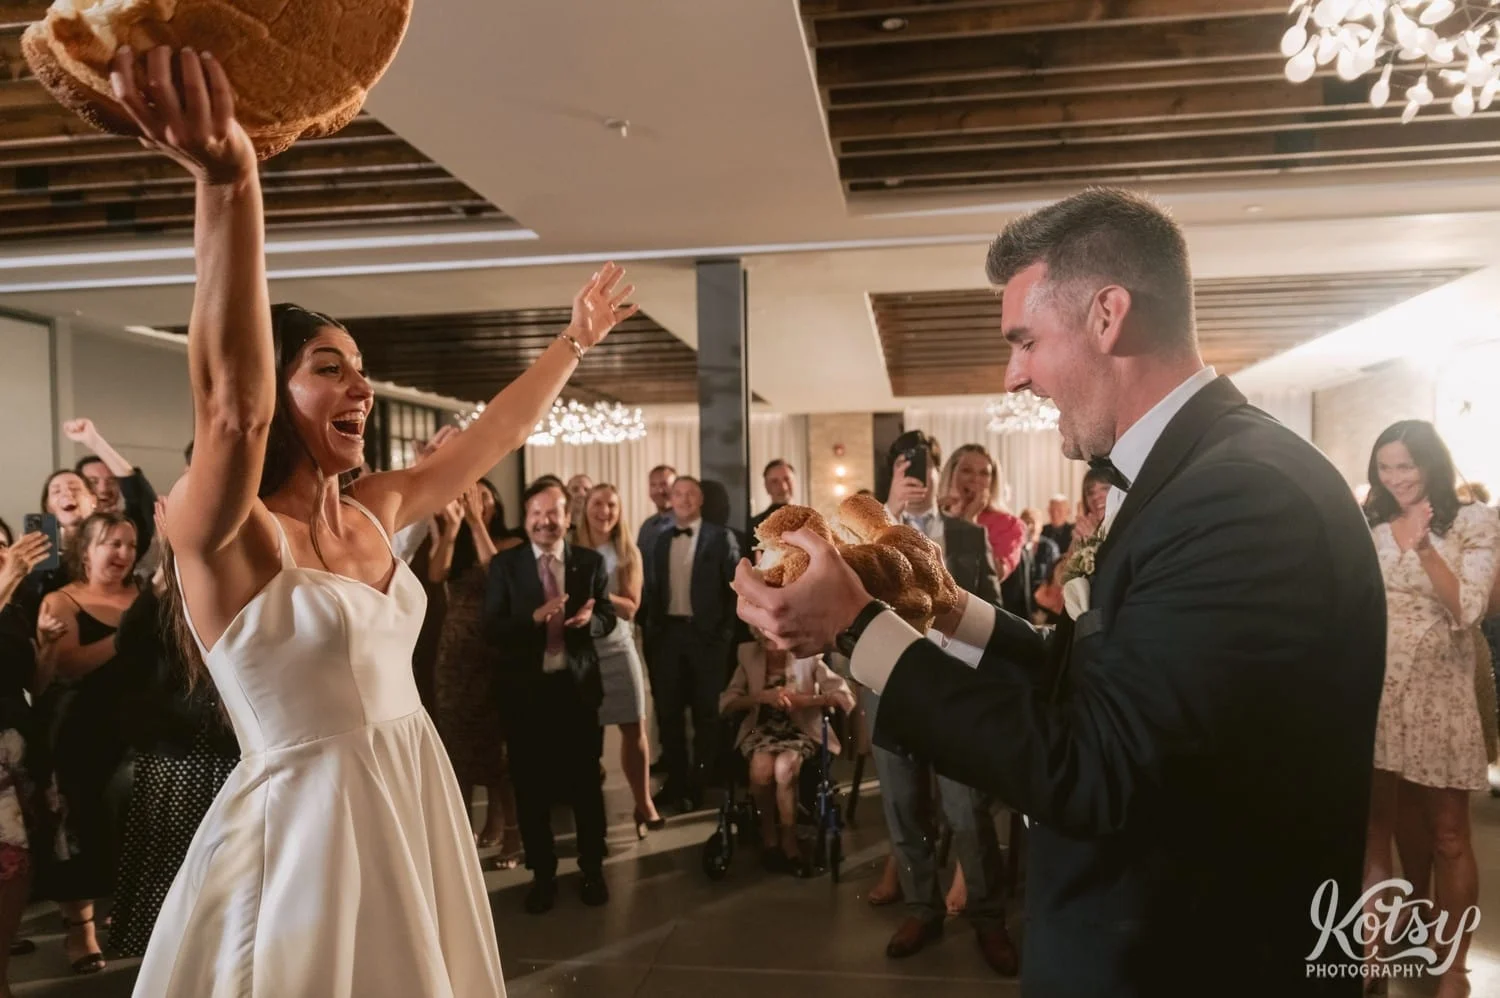 A bride holds up her larger half after a Macedonian breaking of the bread ceremony at Village Loft wedding reception in Toronto, Canada